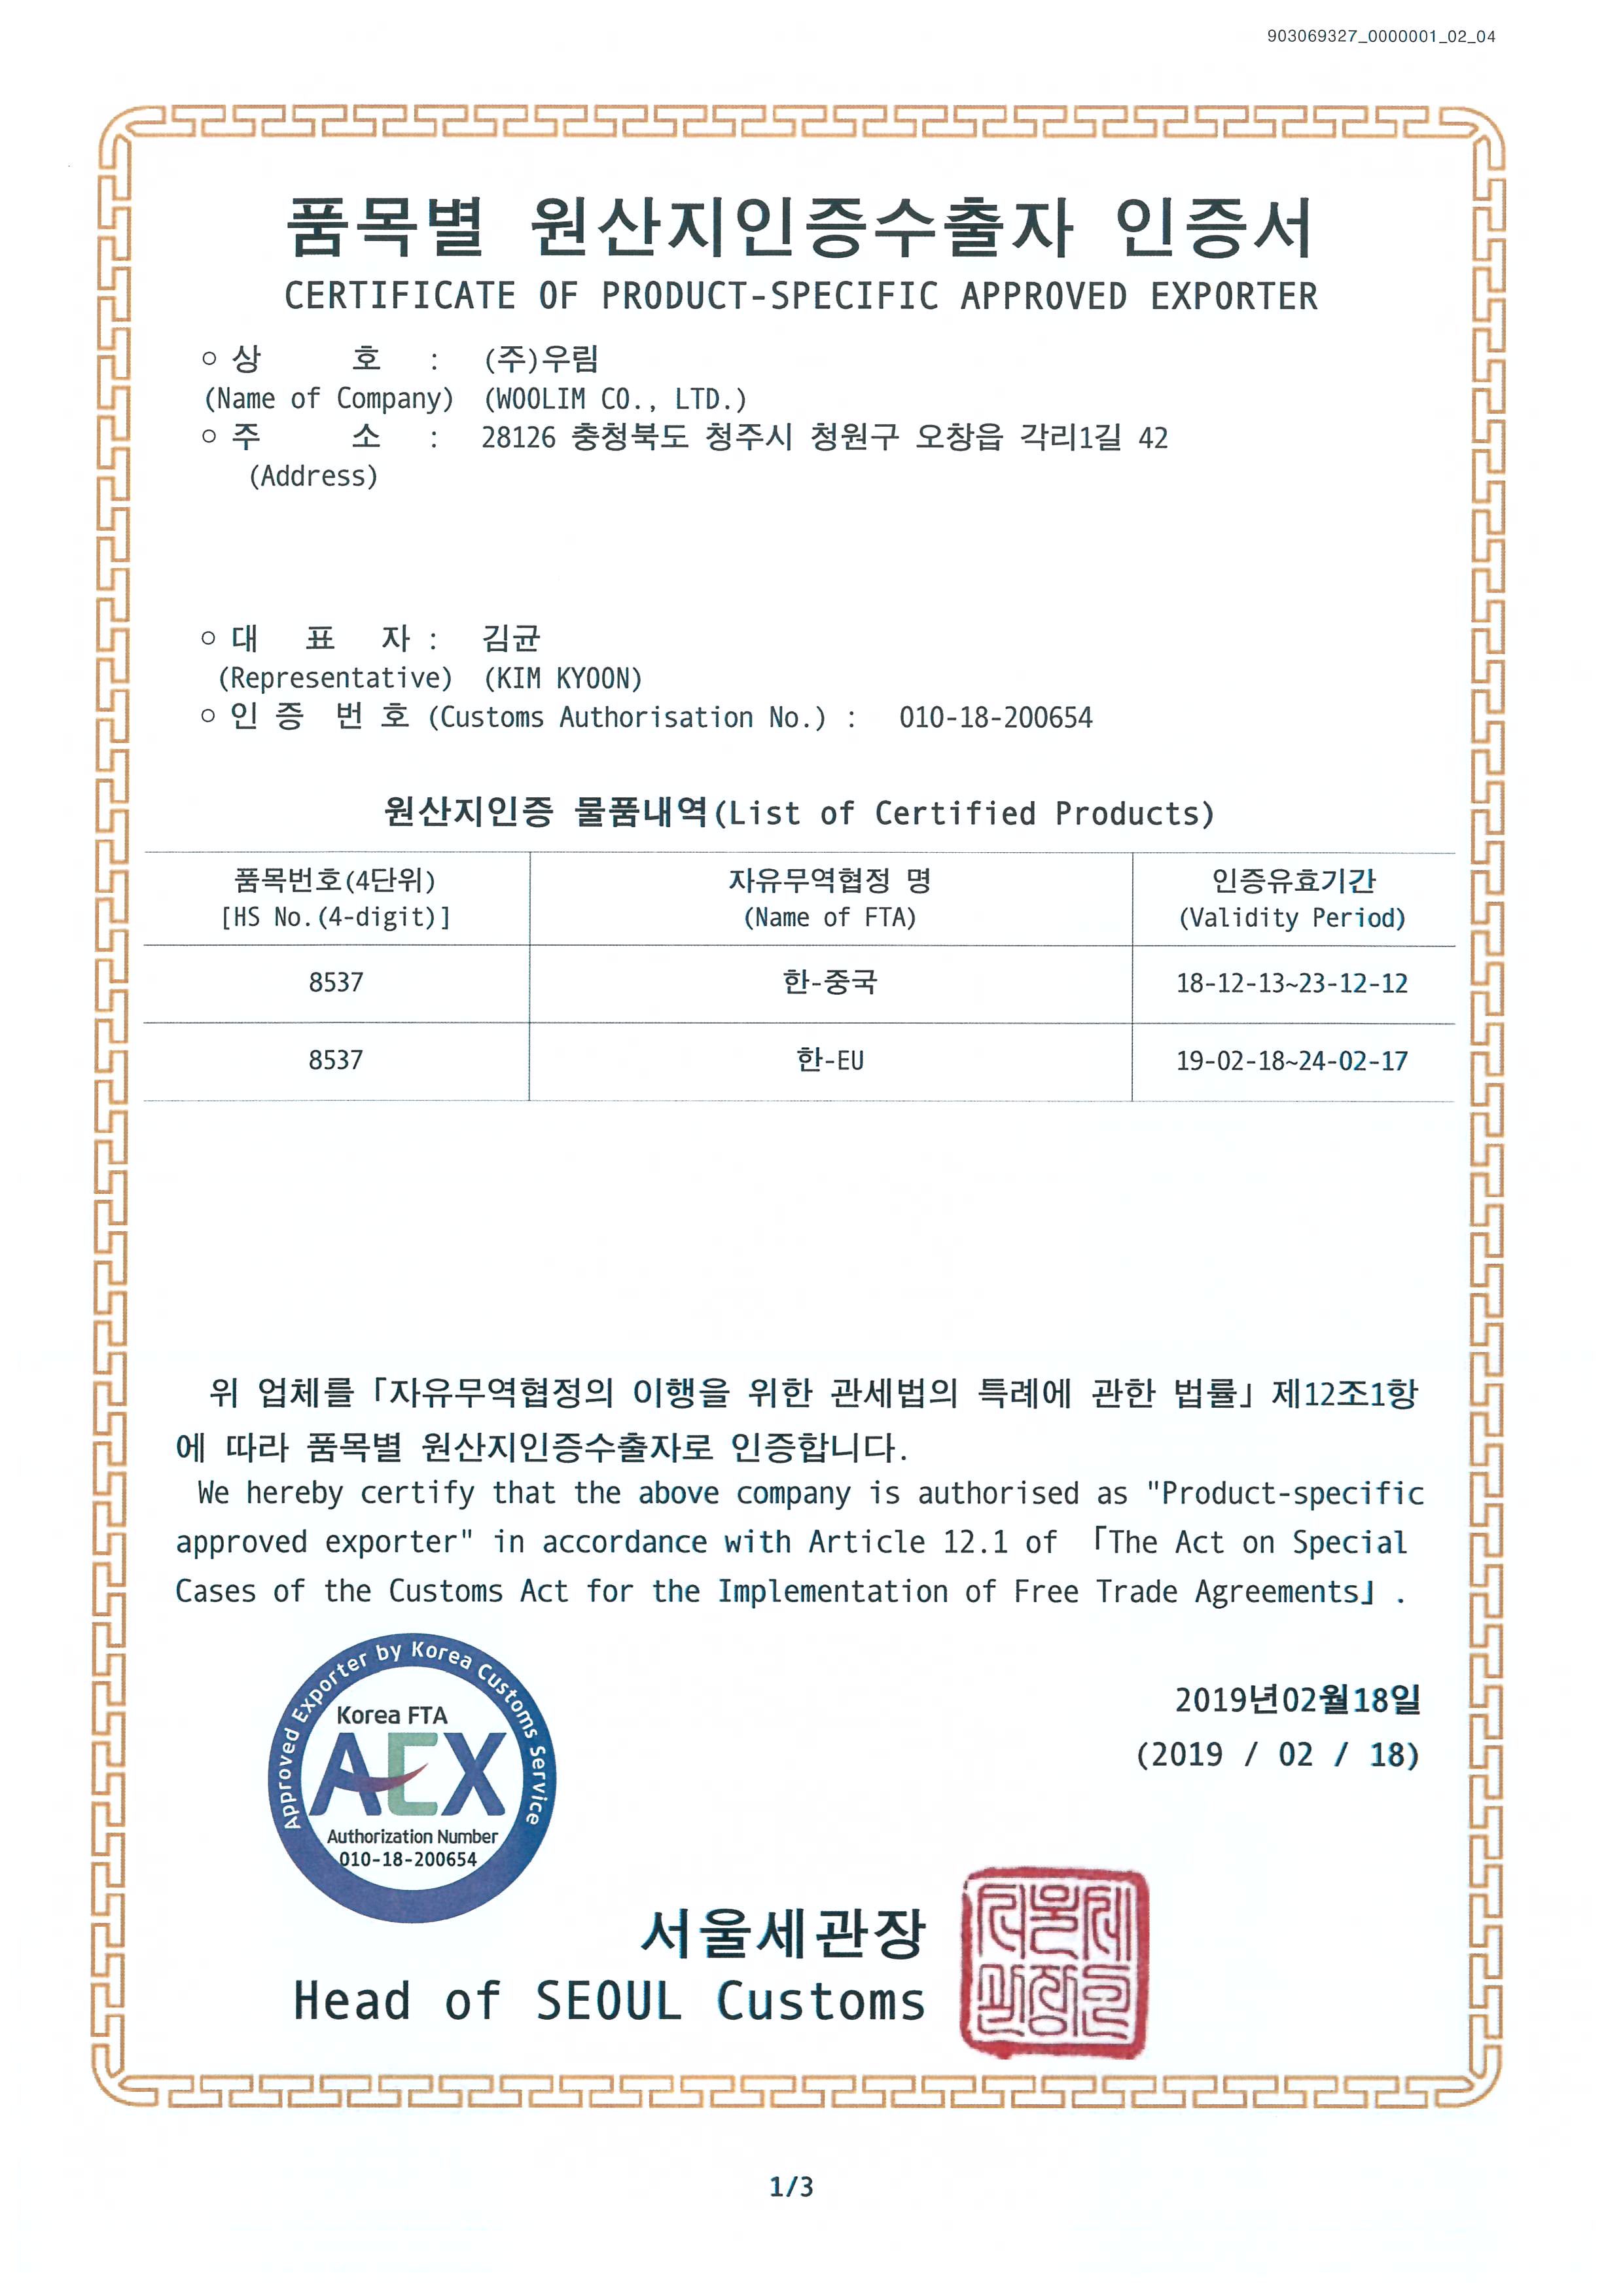 Certificate on country of origin-certified exporter by product item [첨부 이미지1]